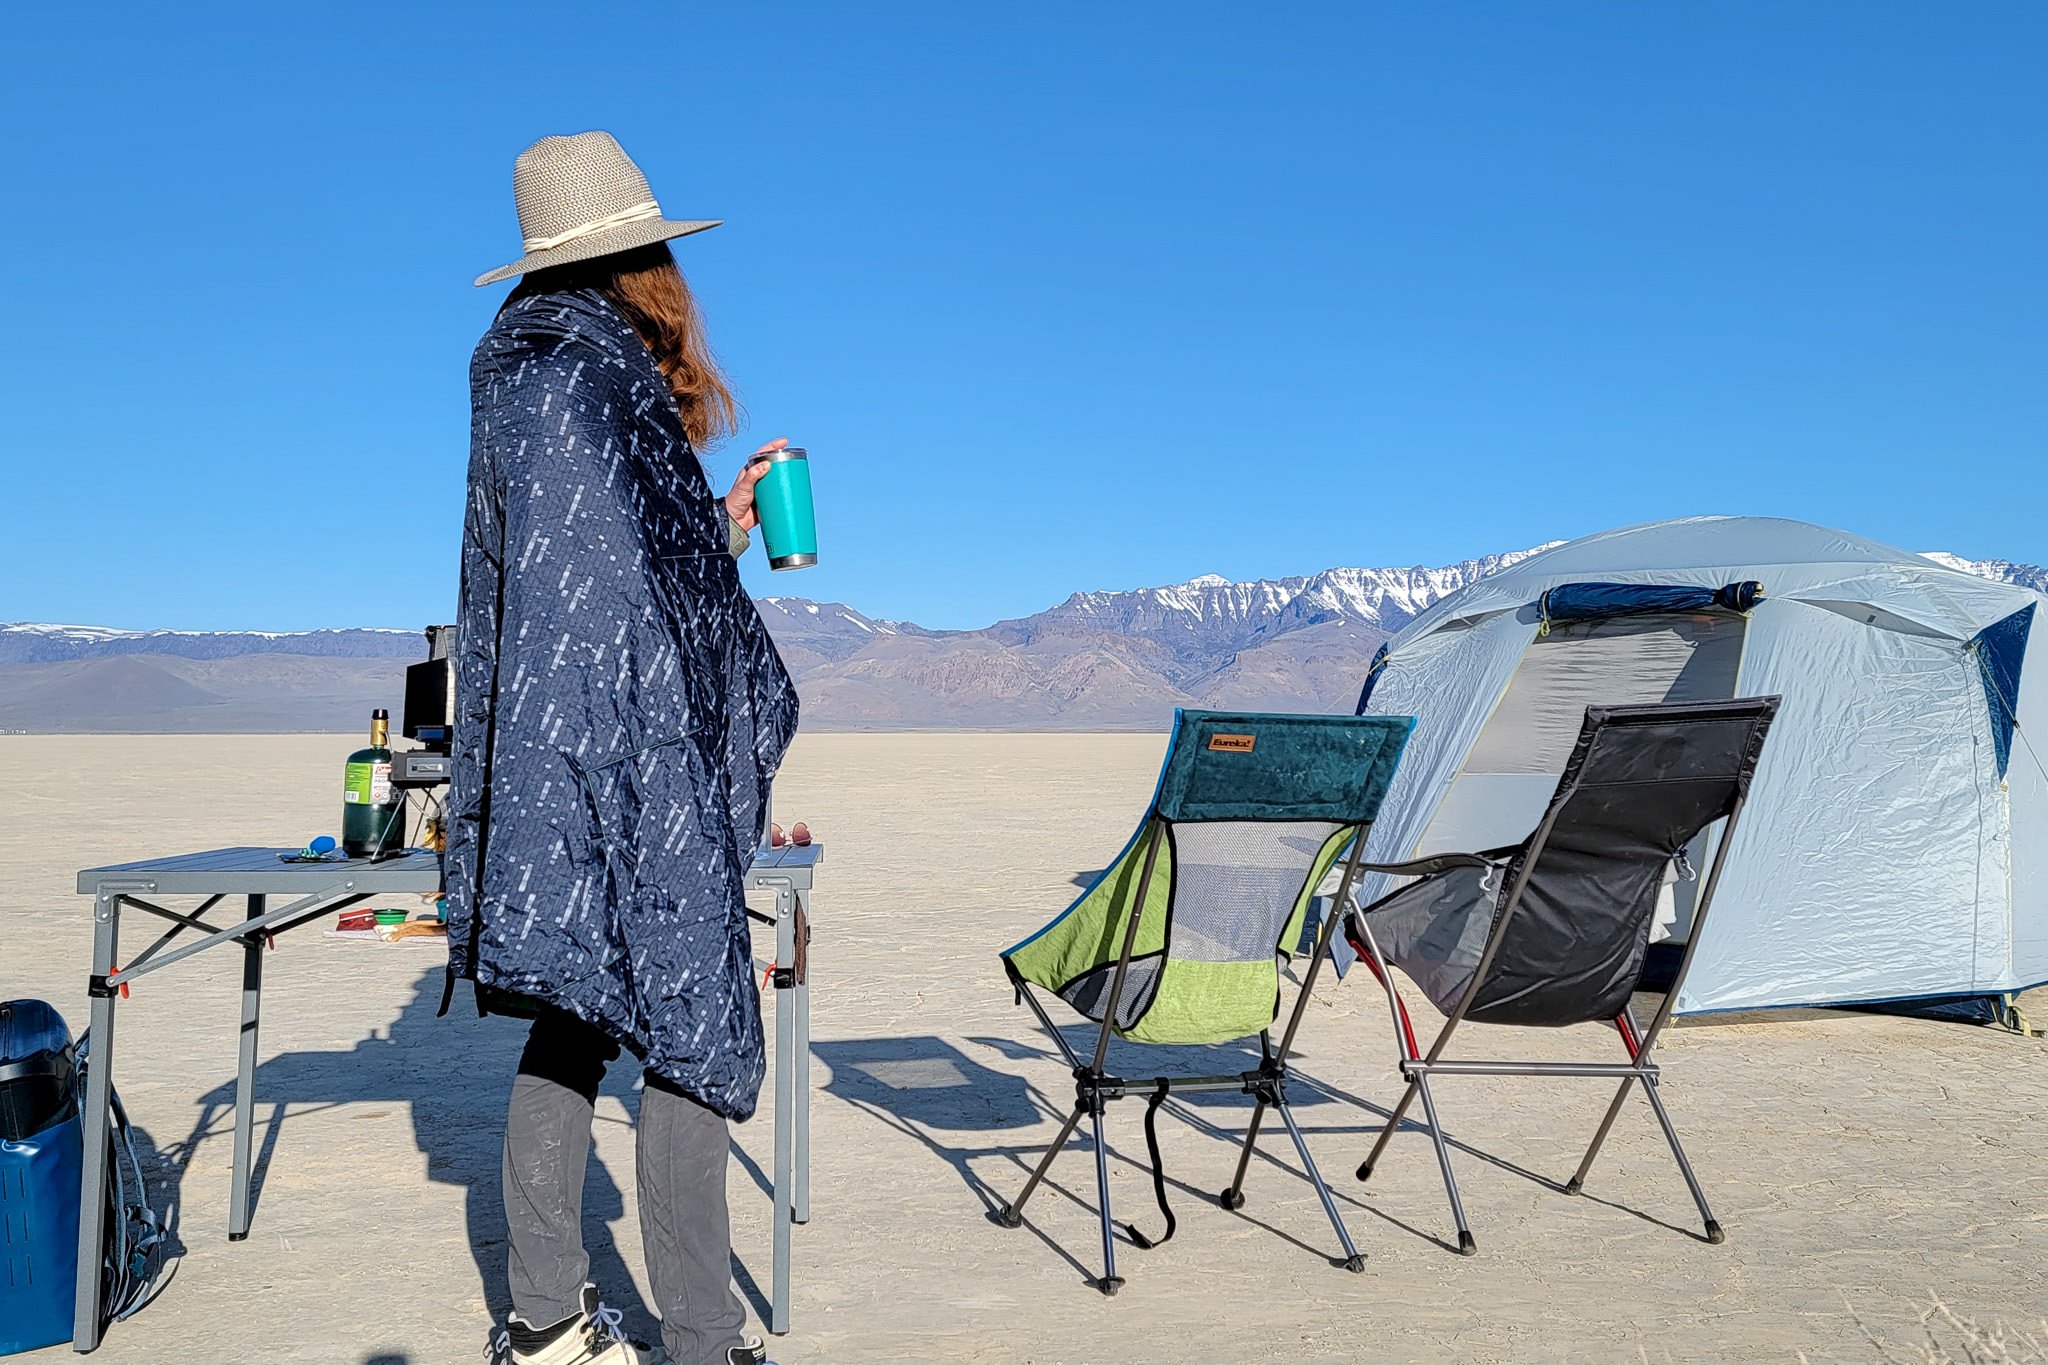 A person standing in a campsite in the desert wrapped up in a camp blanket